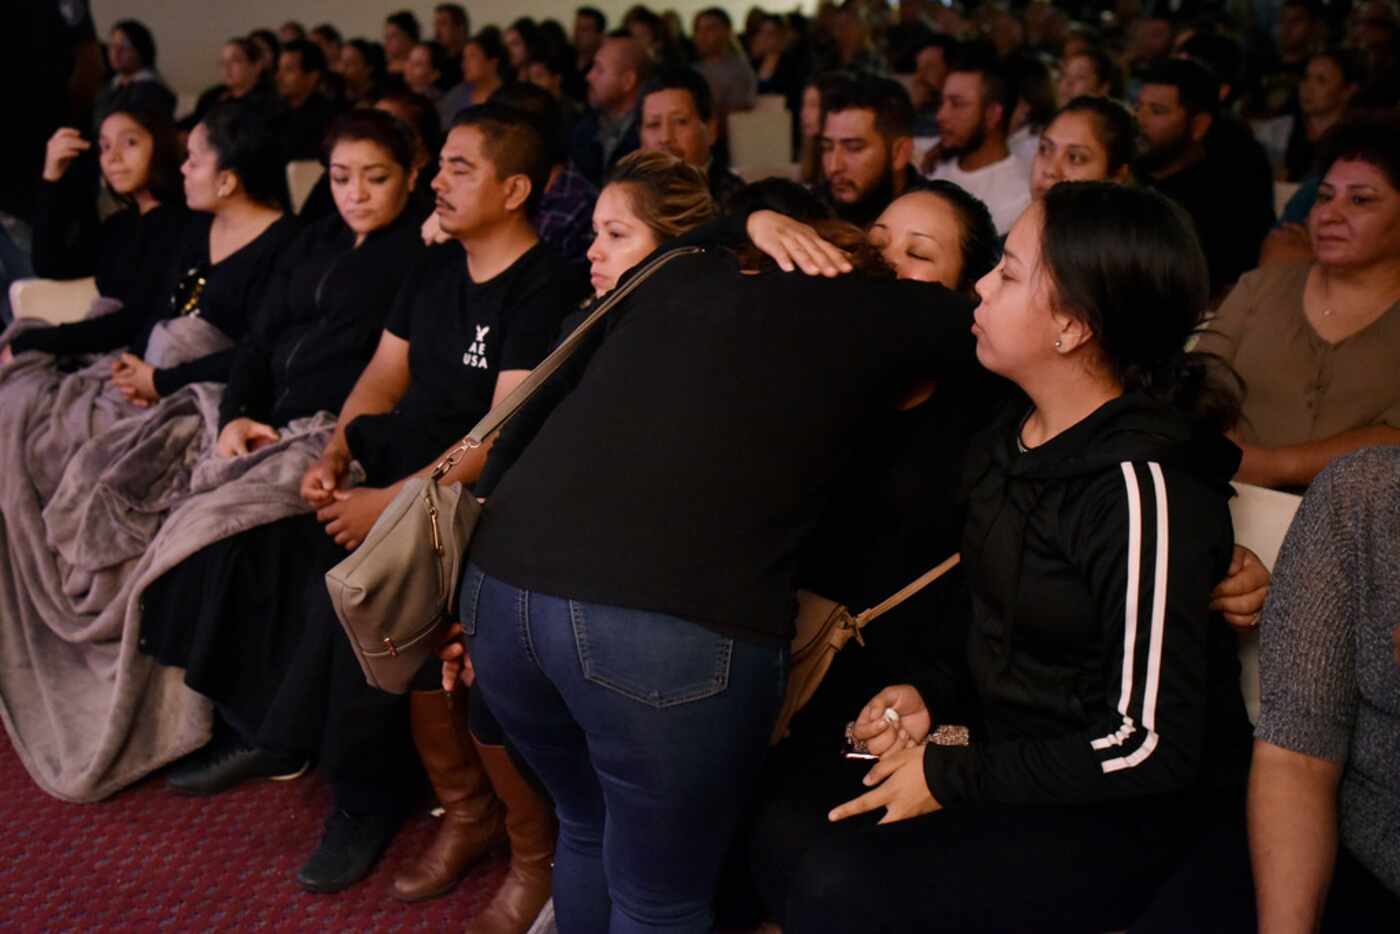 A mourner hugs Raul Ortega Cabrera's widow during the viewing.